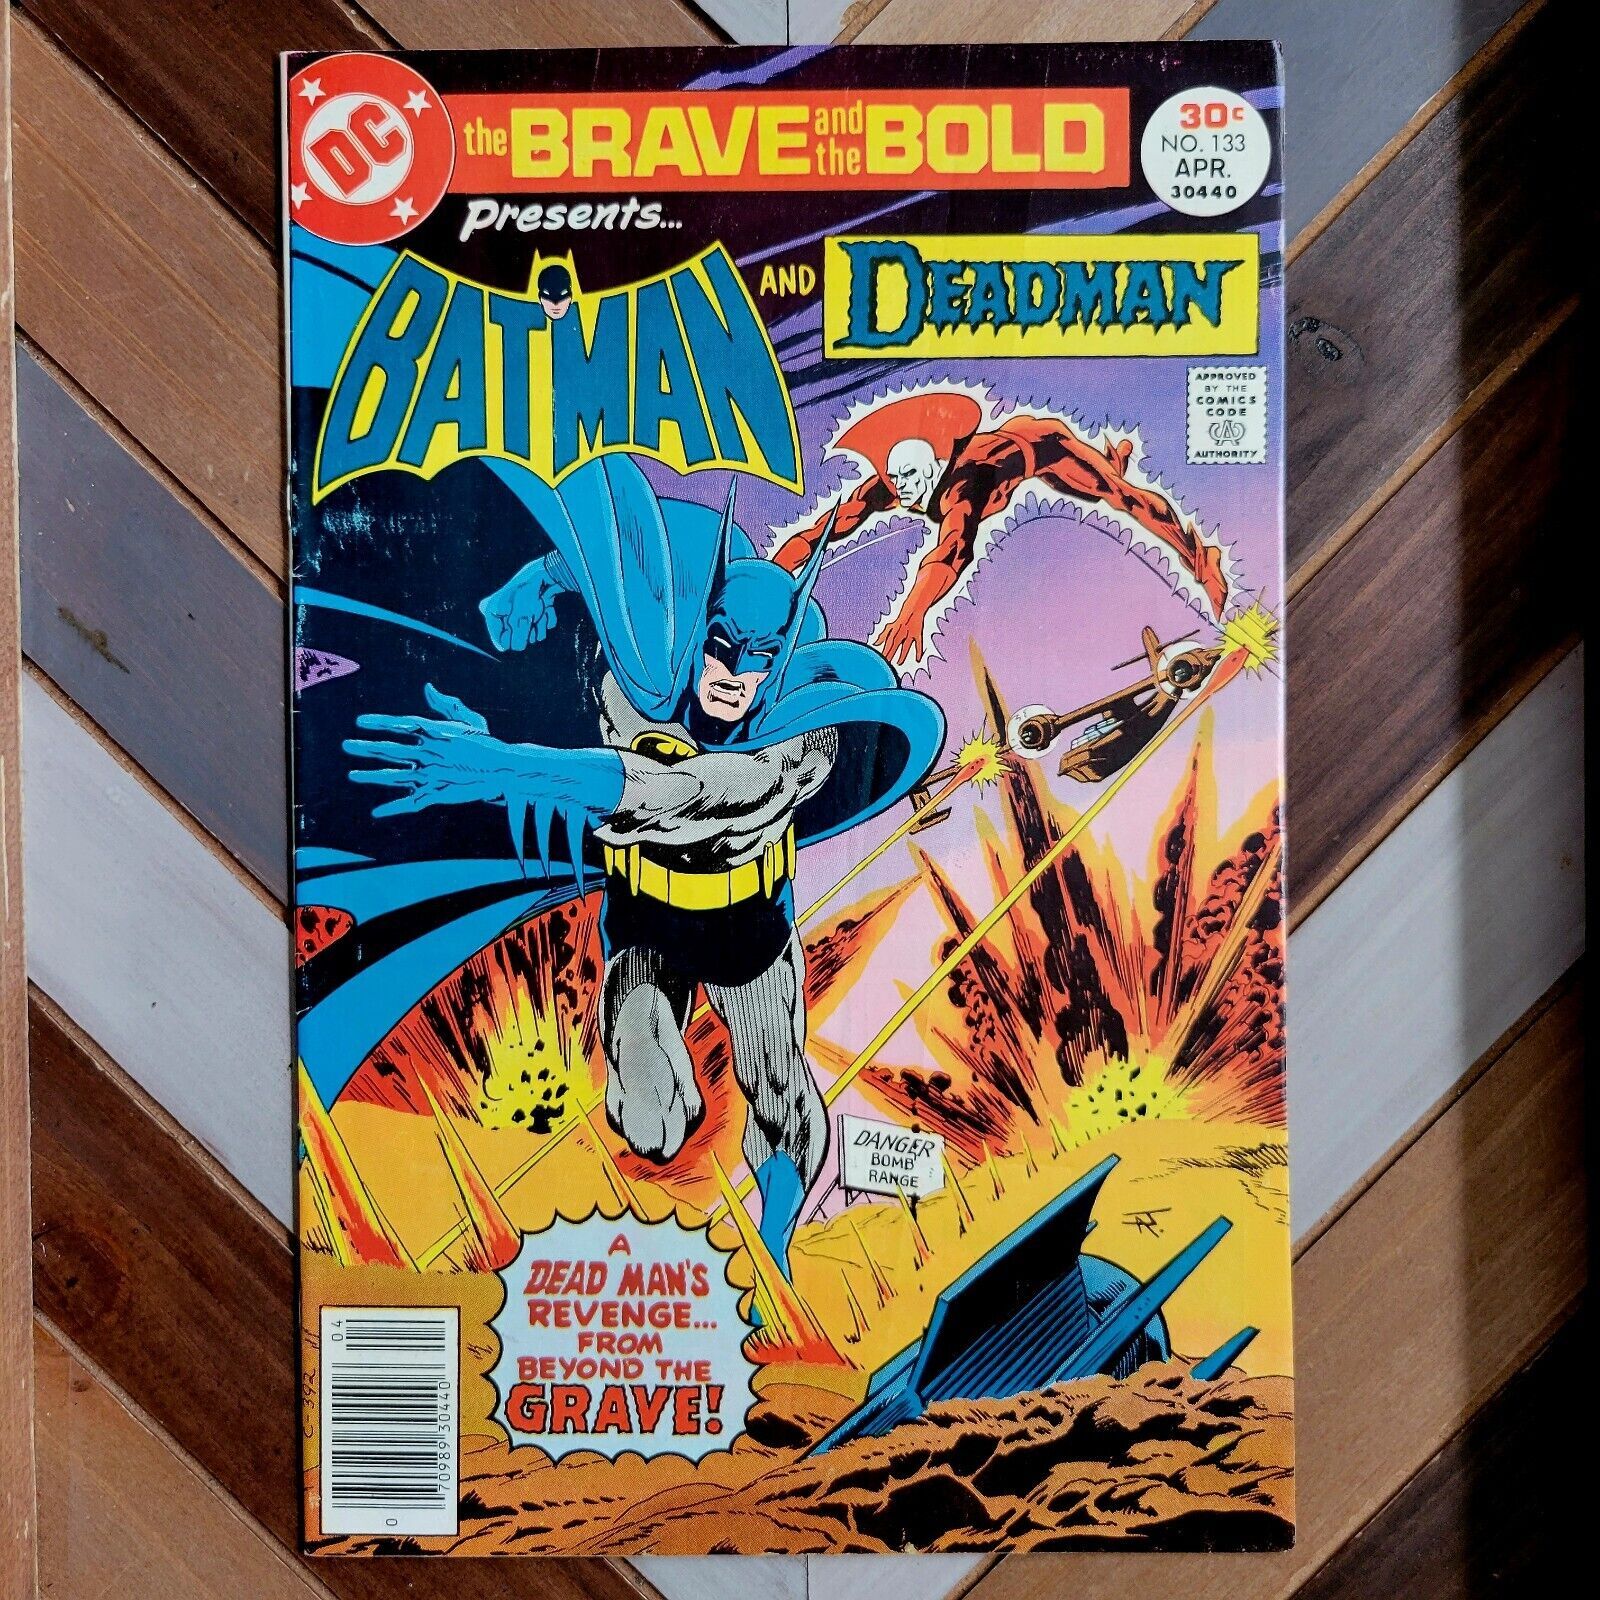 Heroes for Sale - Comics & More - Brave And The Bold #133 April, 1977.